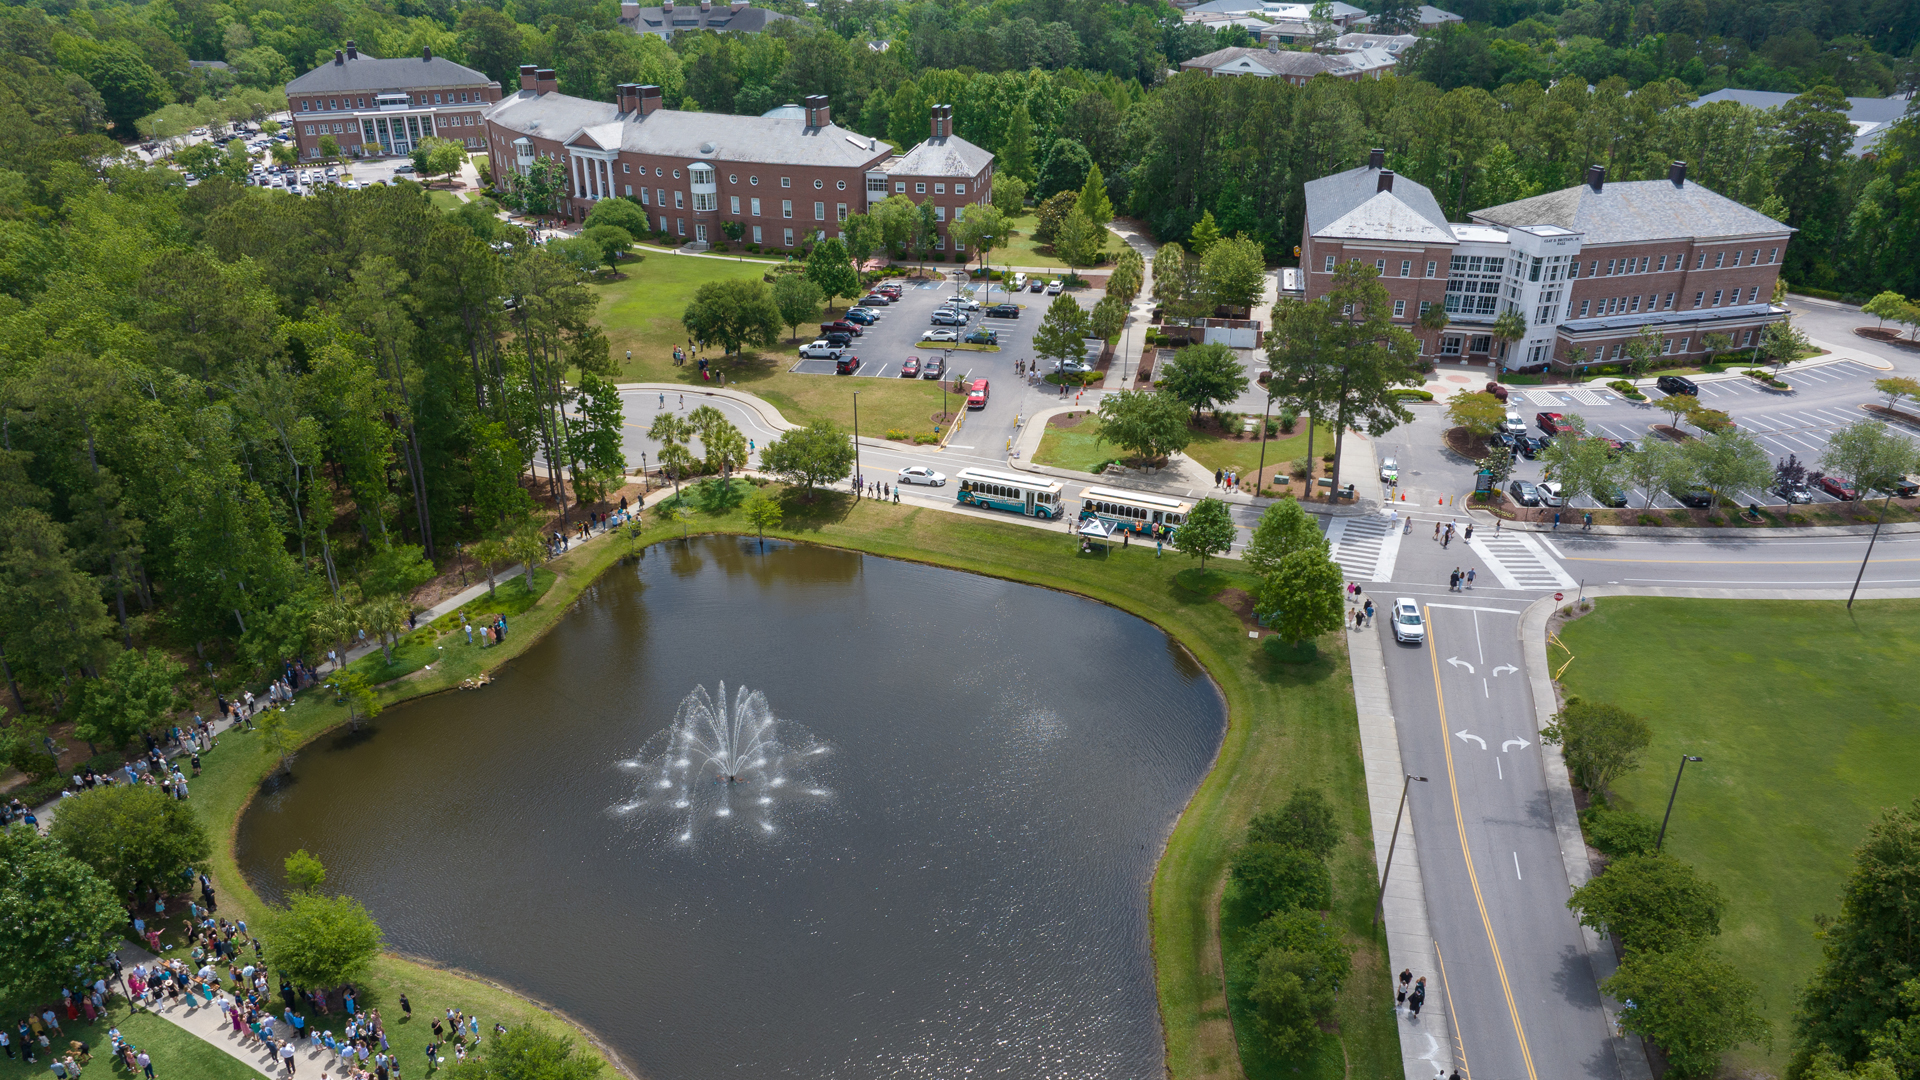 Aerial of Wall, HTC Center pond, & Penny Hall